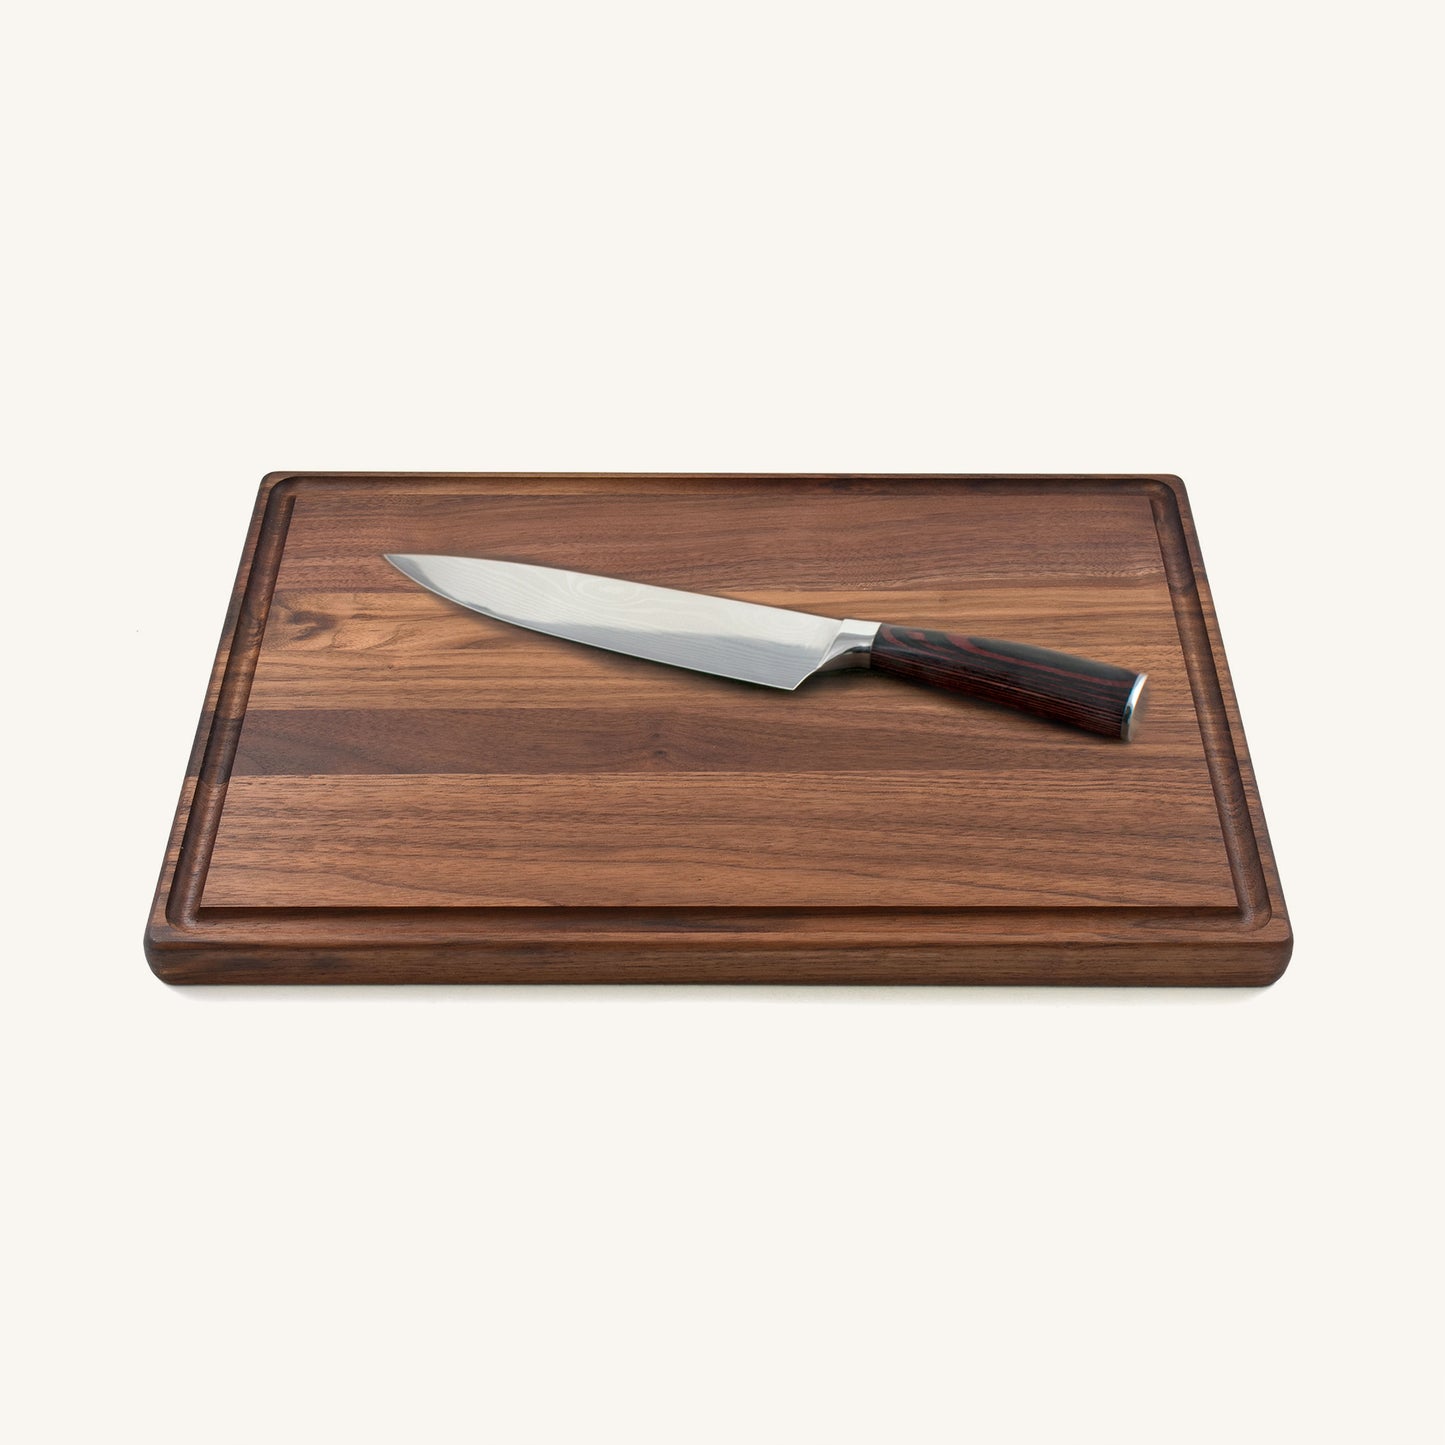 Bundle of Large Cutting Board with Chef Knife